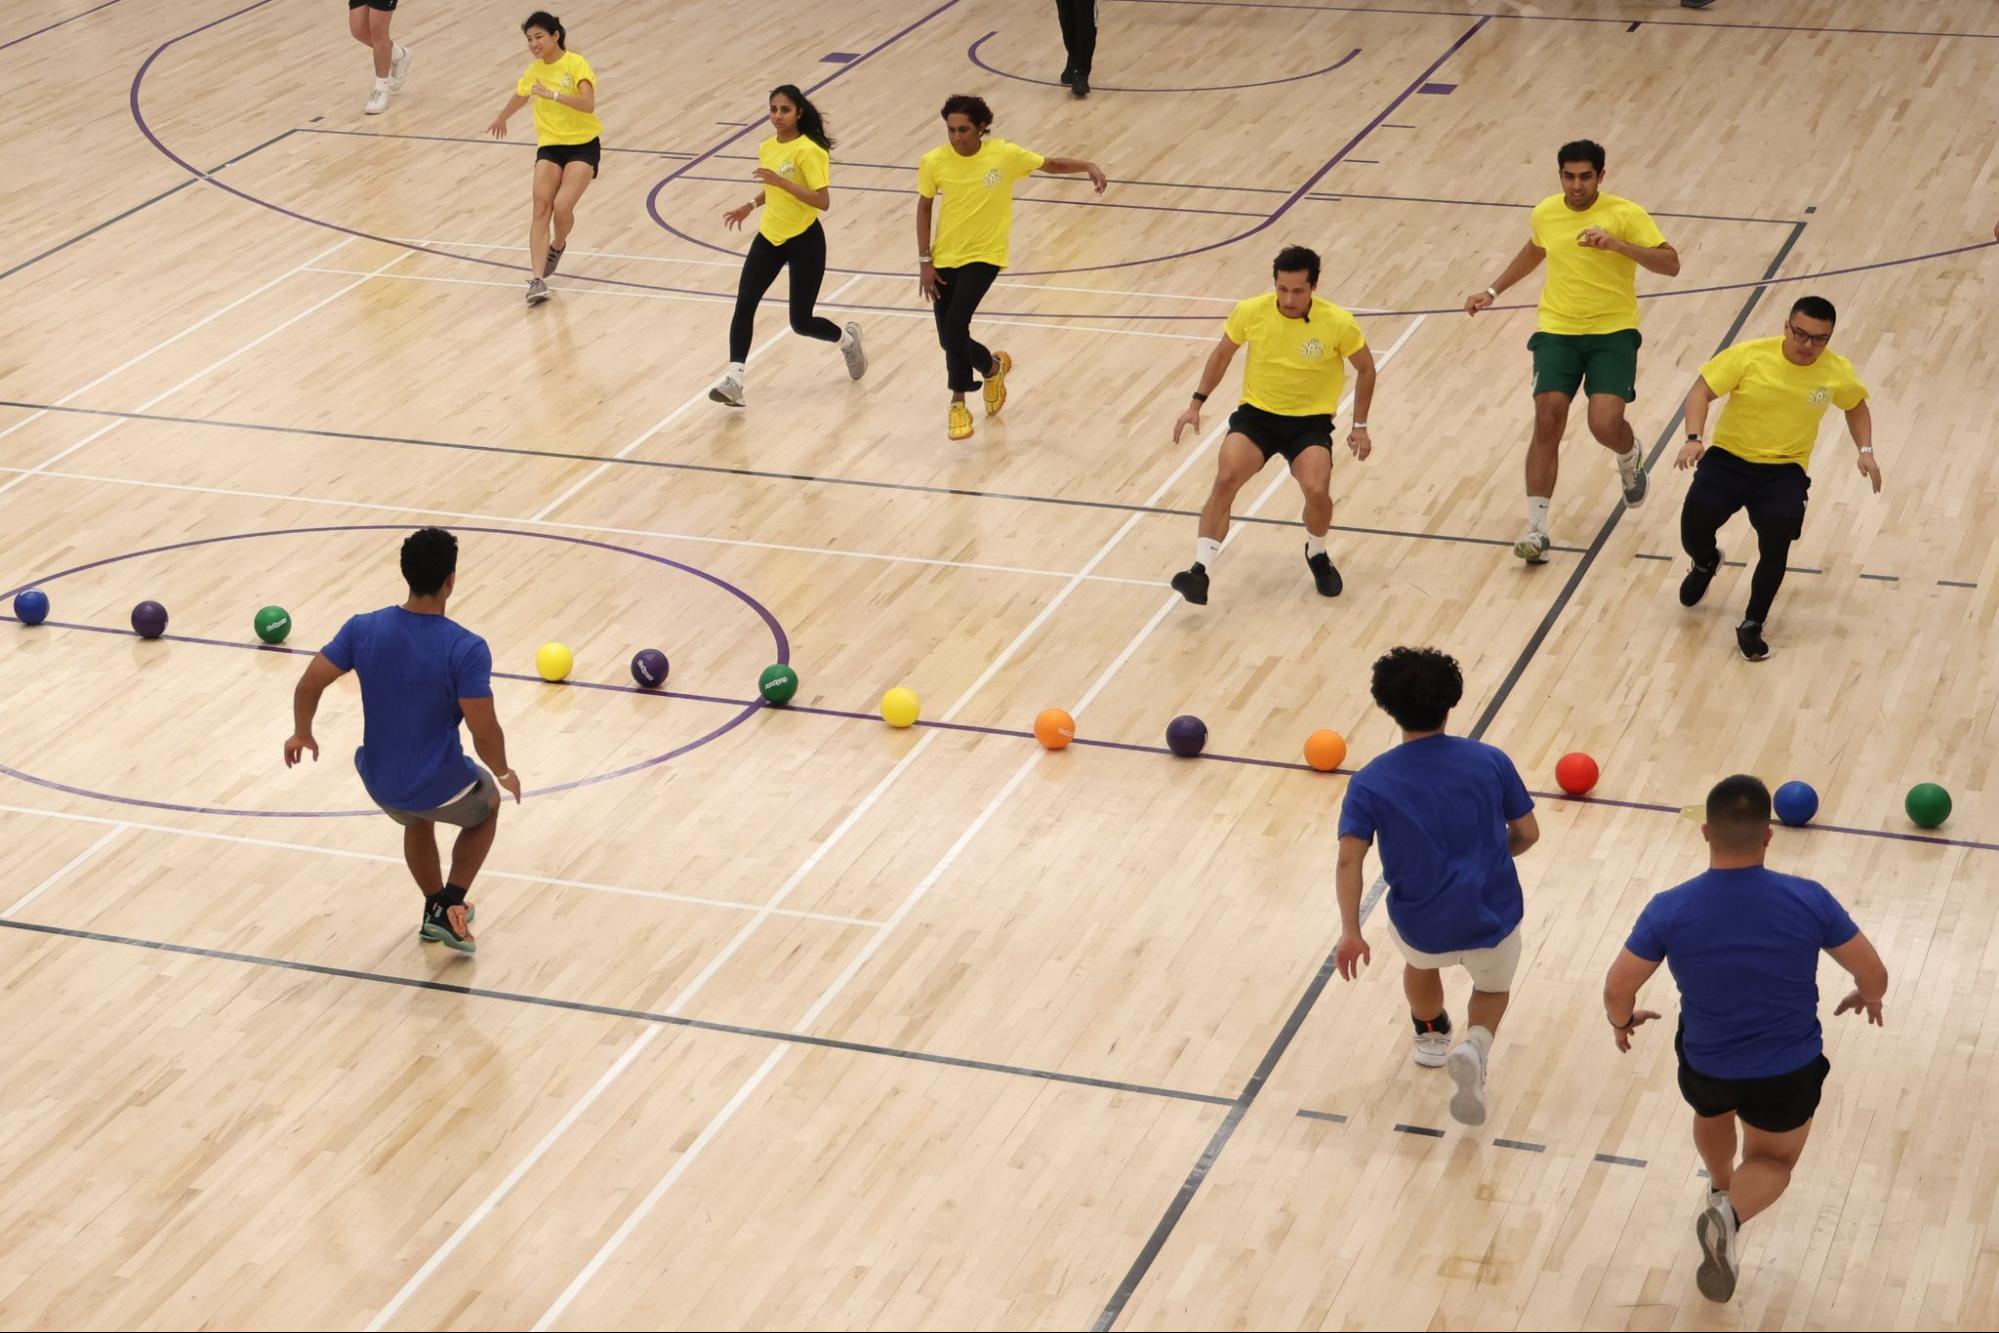 Two teams of people run towards a line of multi-colored balls at the center of a basketball court. One team wears purple and the other wears yellow.